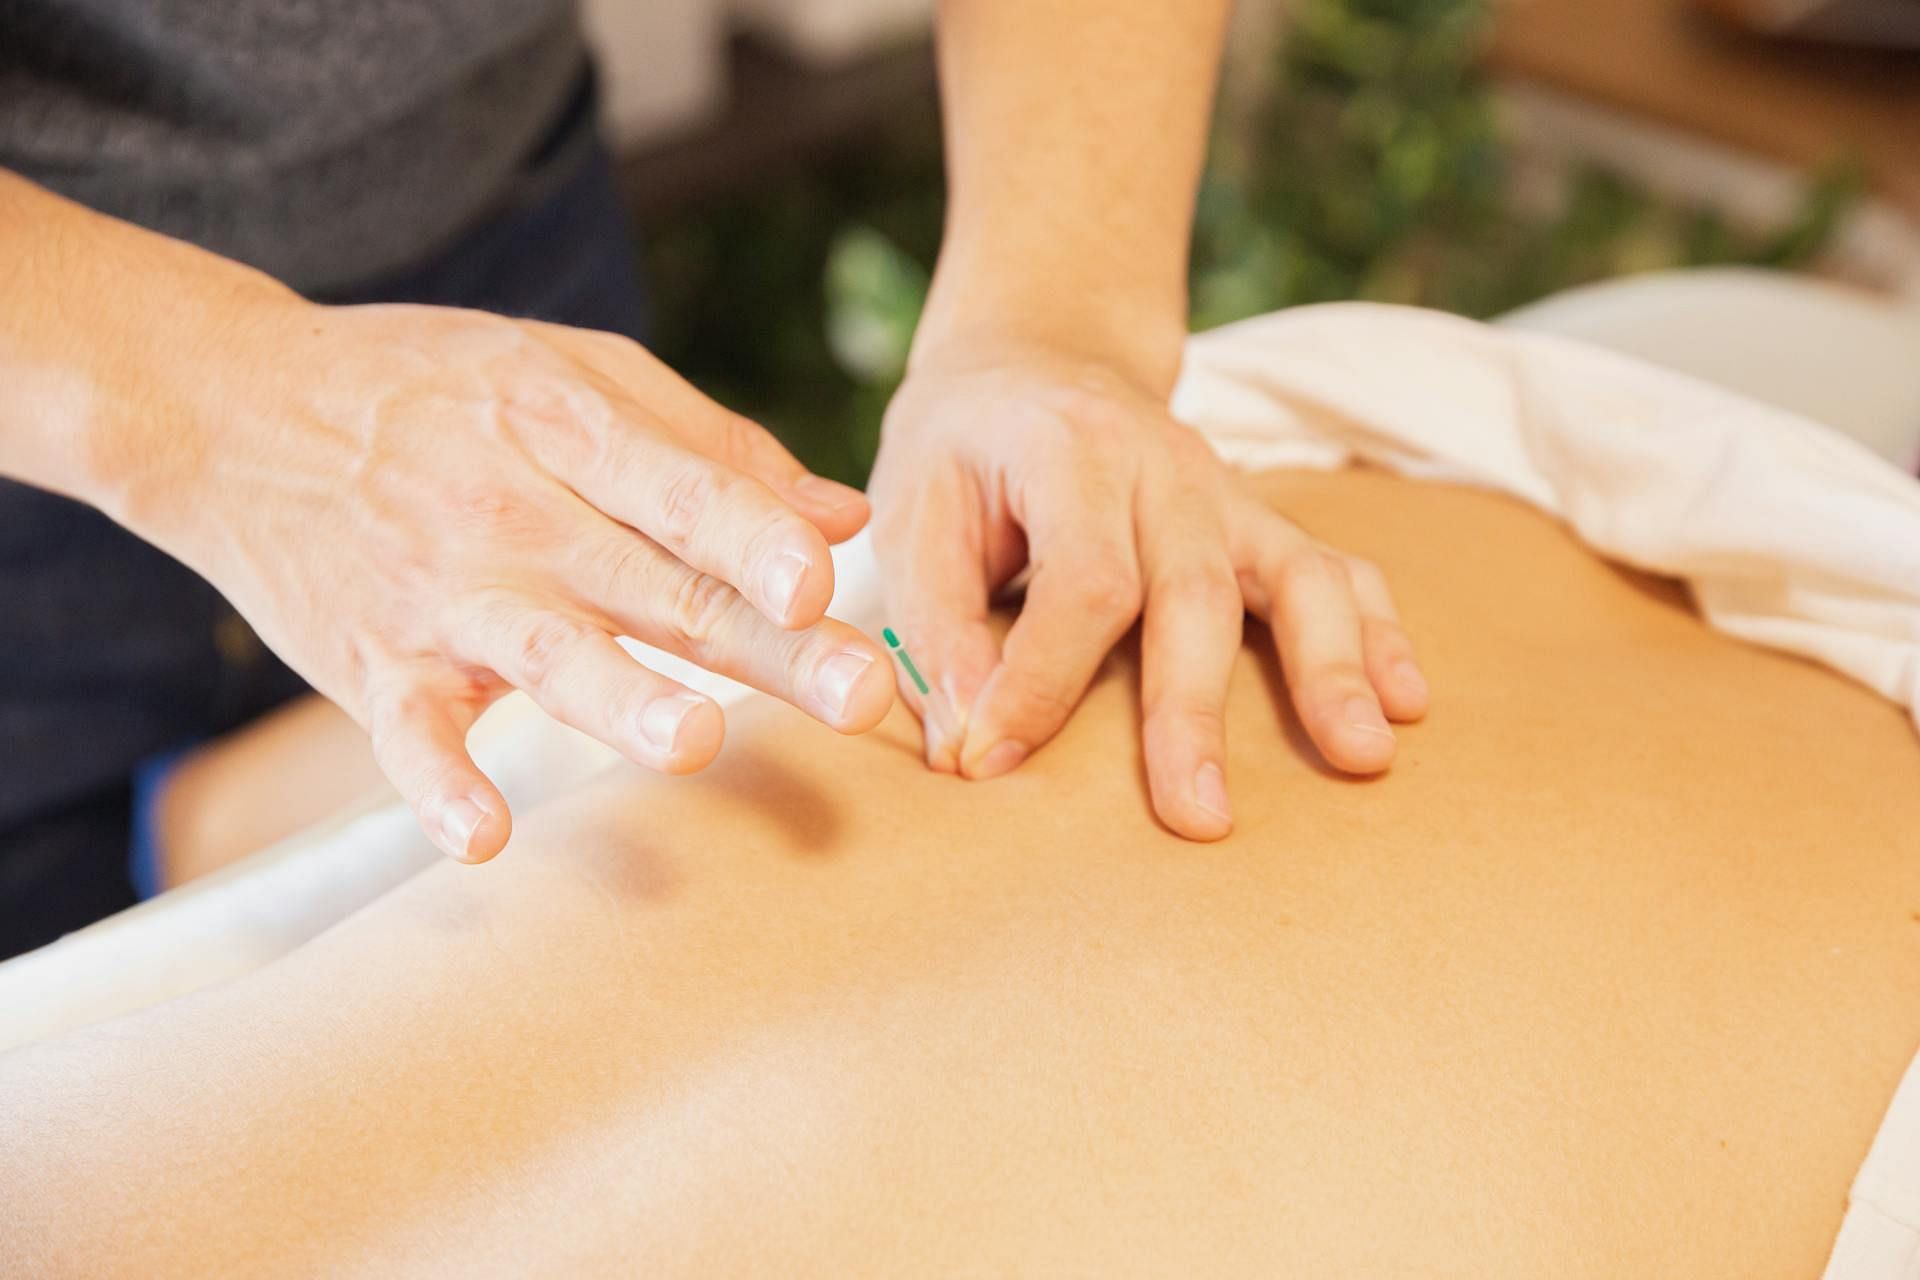 Acupuncture for pregnancy is a common relieving method (Image via Pexels/ Ryutaro Tsukata)